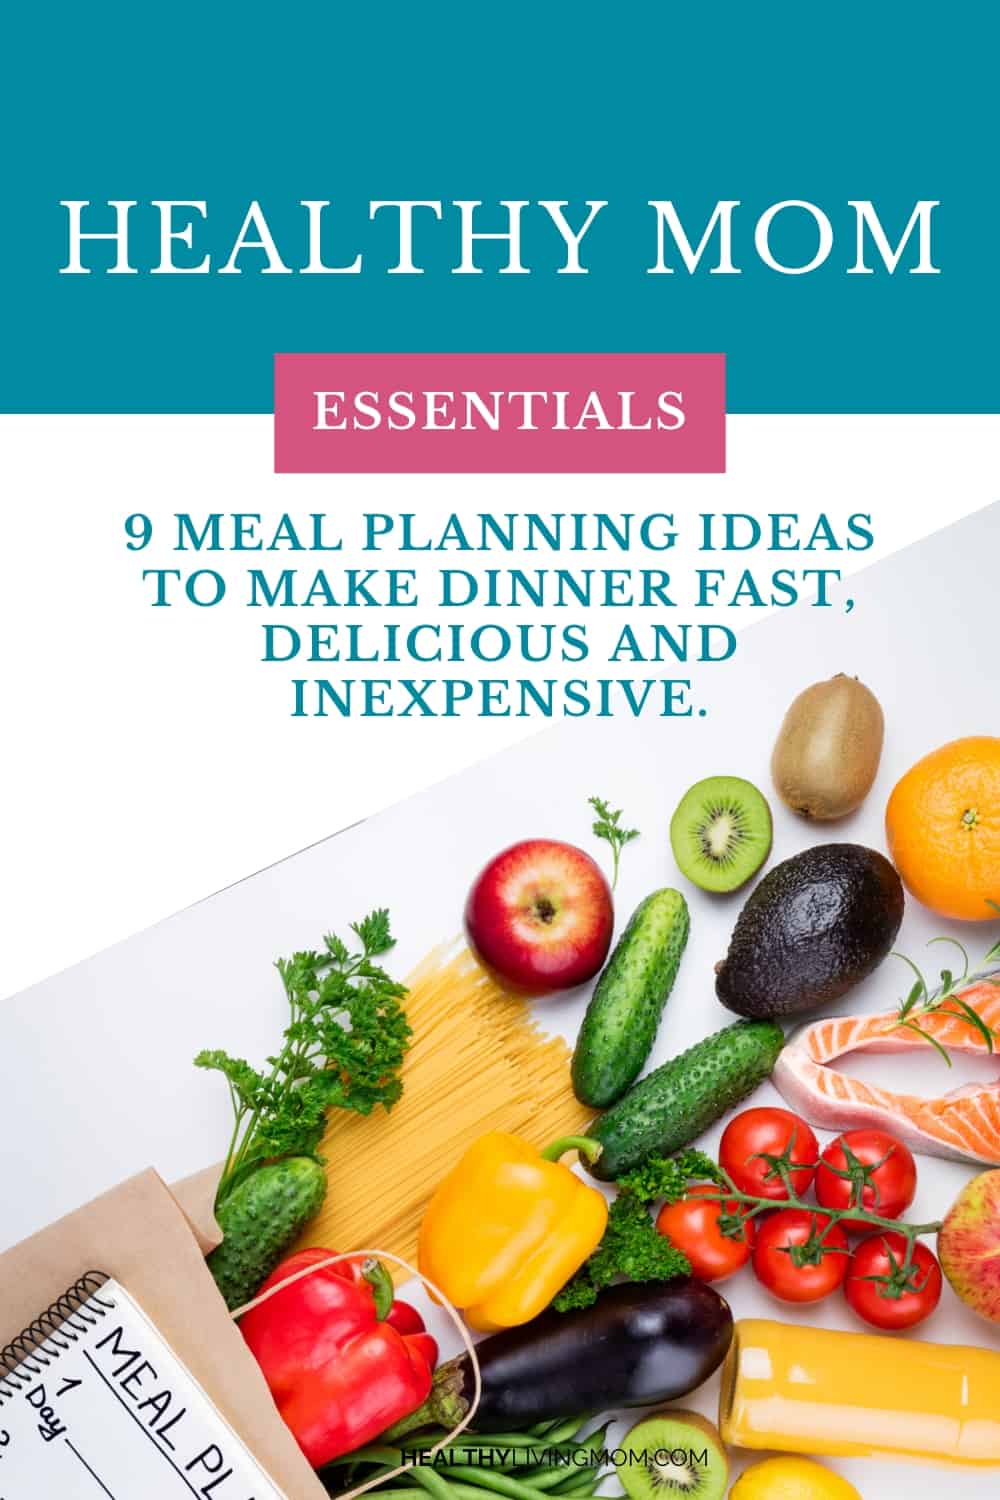 9 Different Meal Planning Ideas to Make Dinner Fast, Delicious and ...